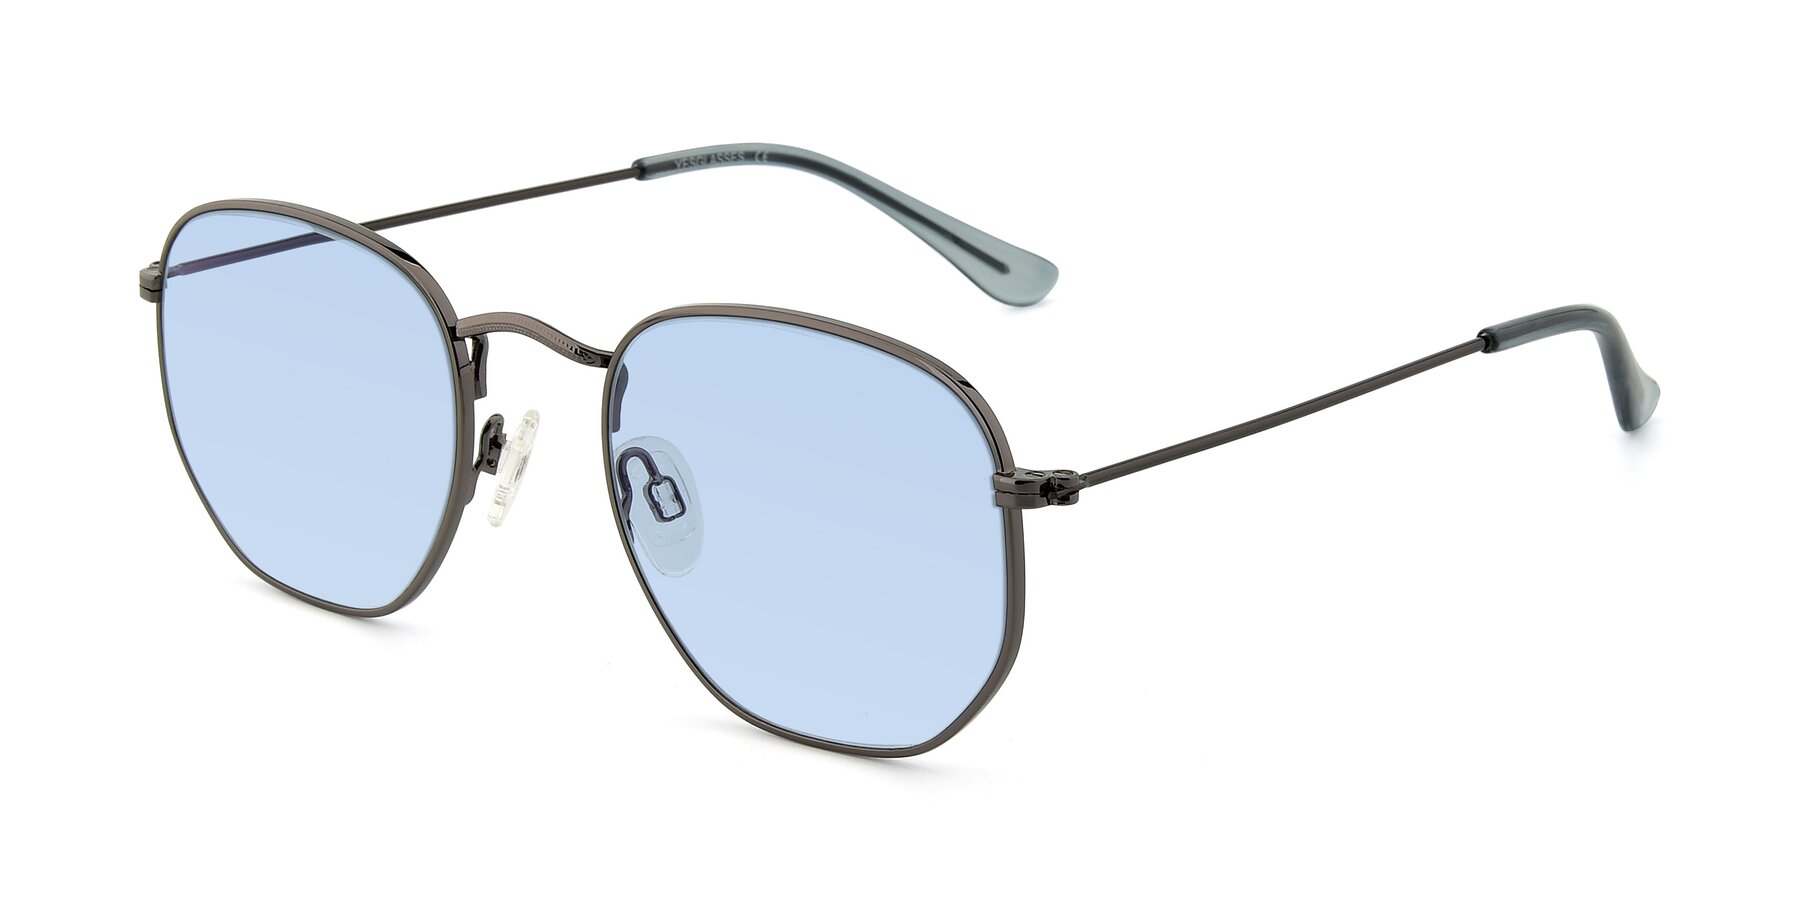 Angle of SSR1944 in Grey with Light Blue Tinted Lenses